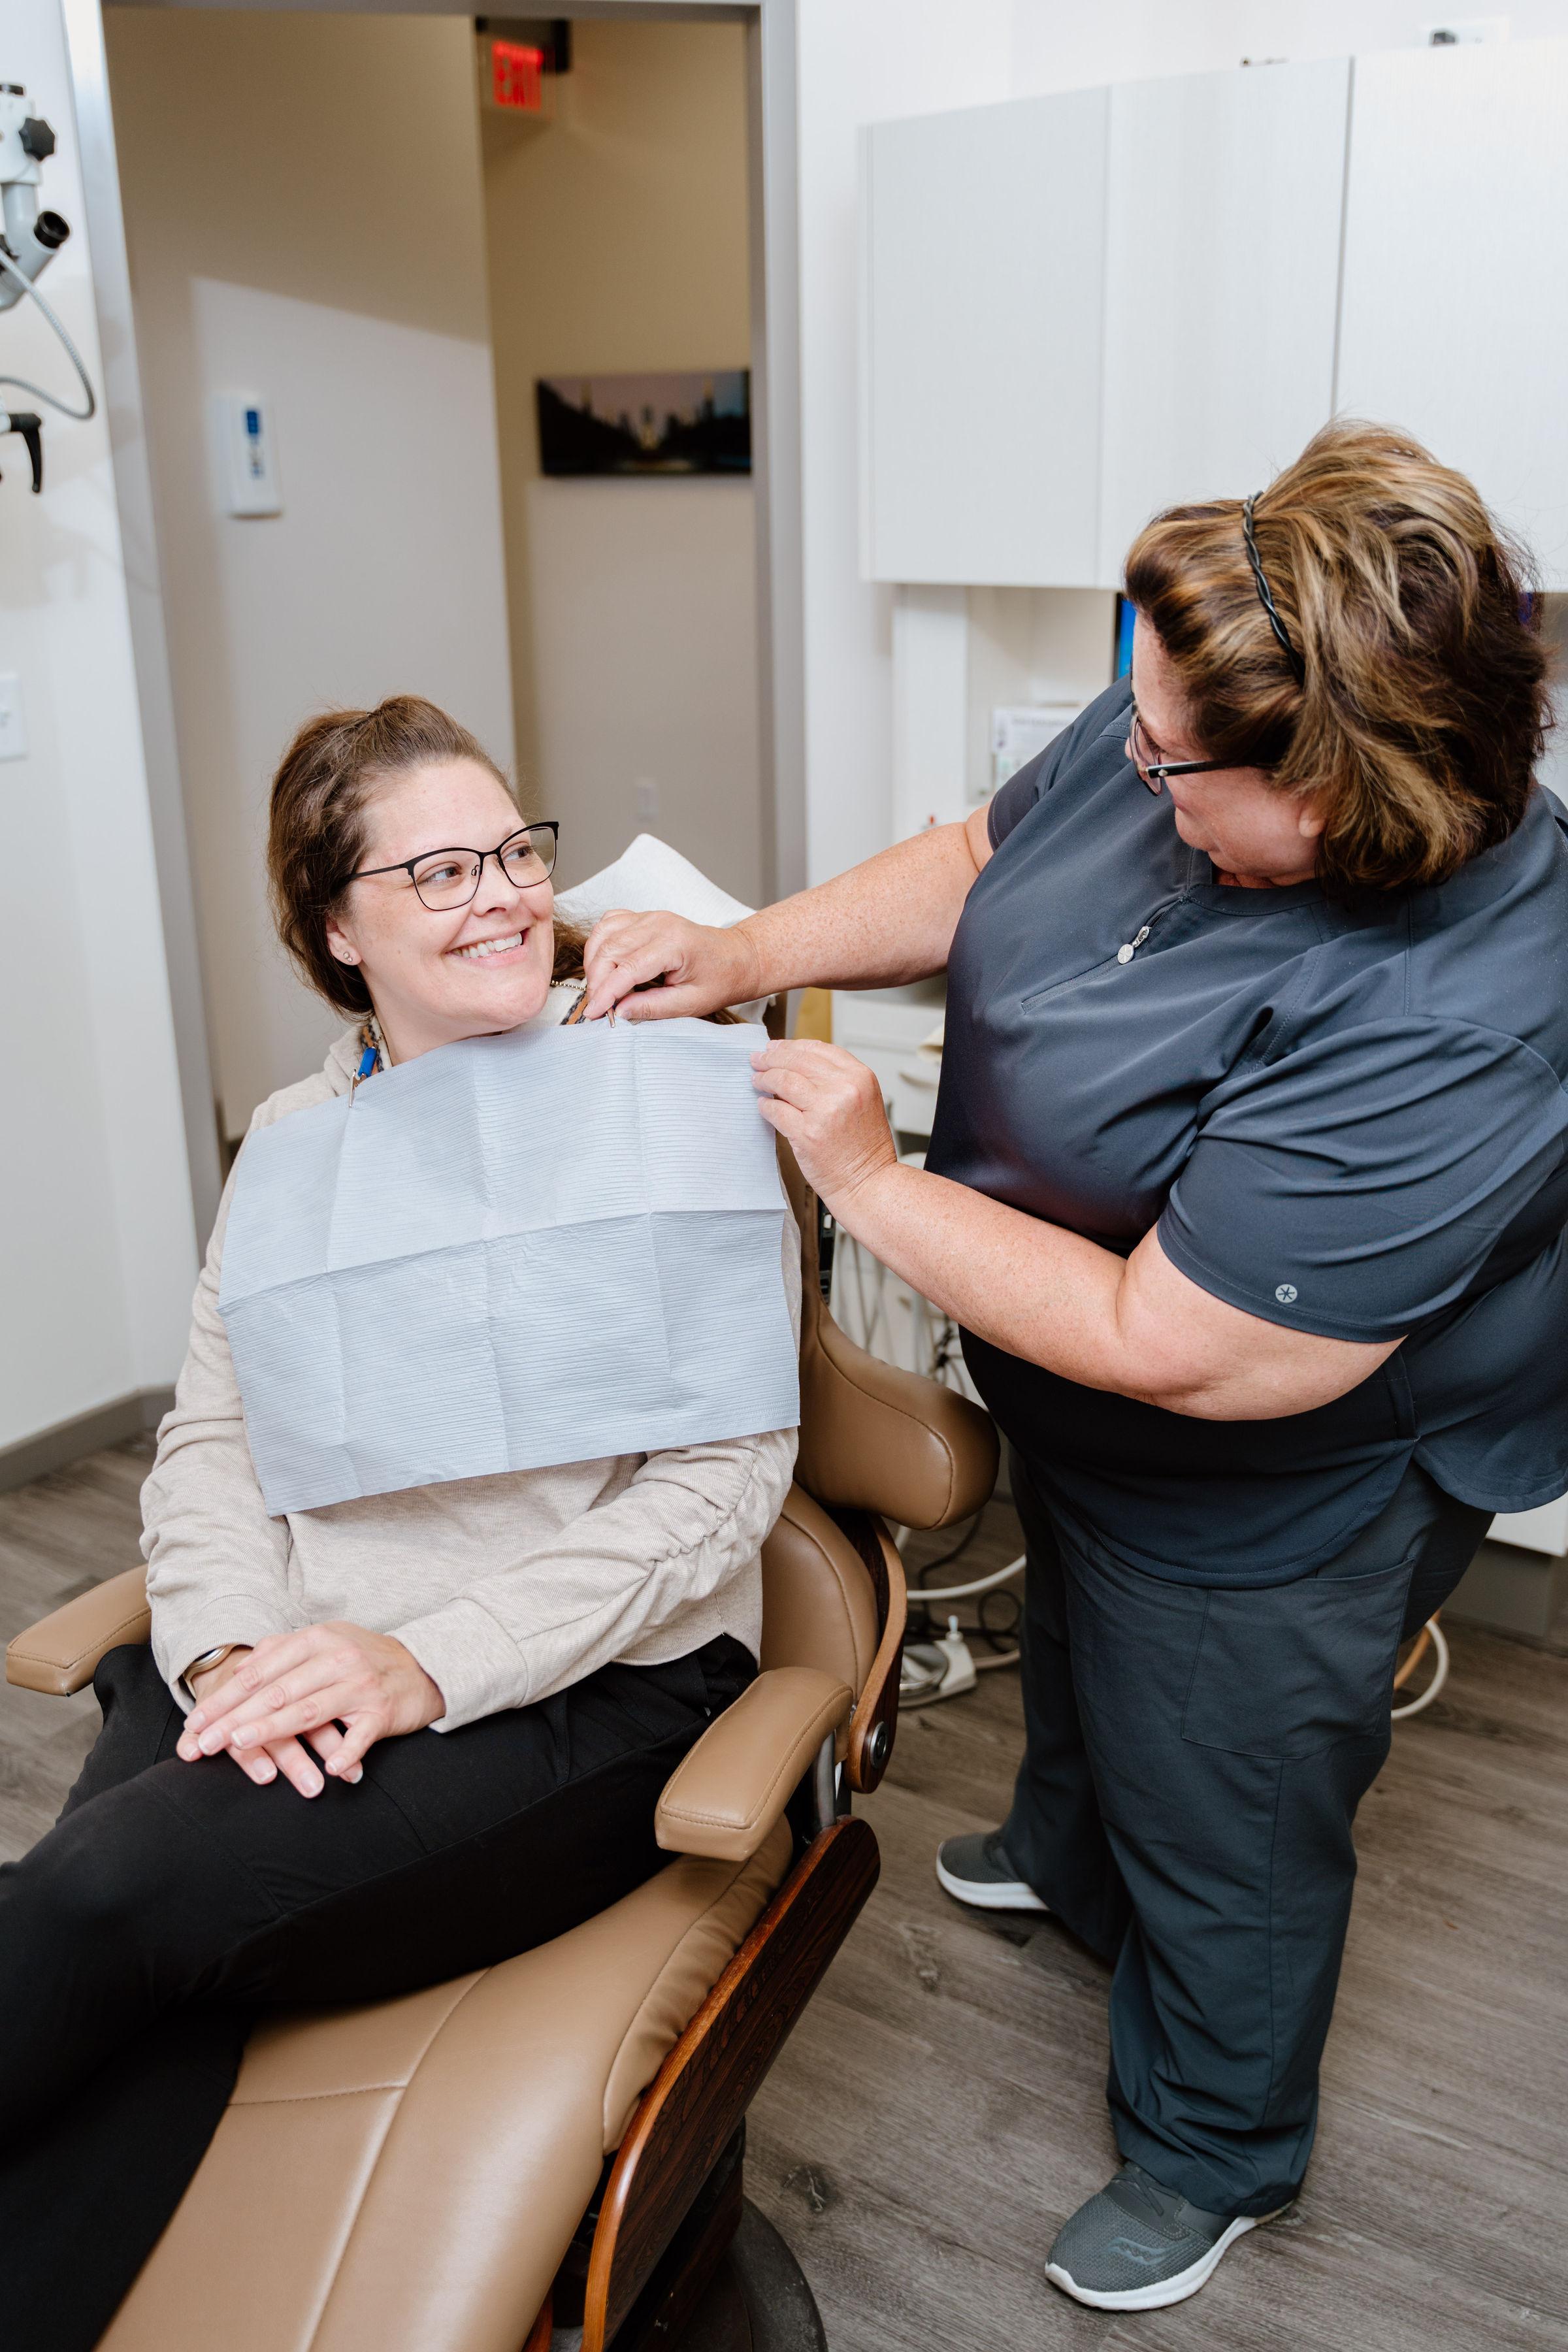 Dental patient receiving personalized care from a compassionate dentist